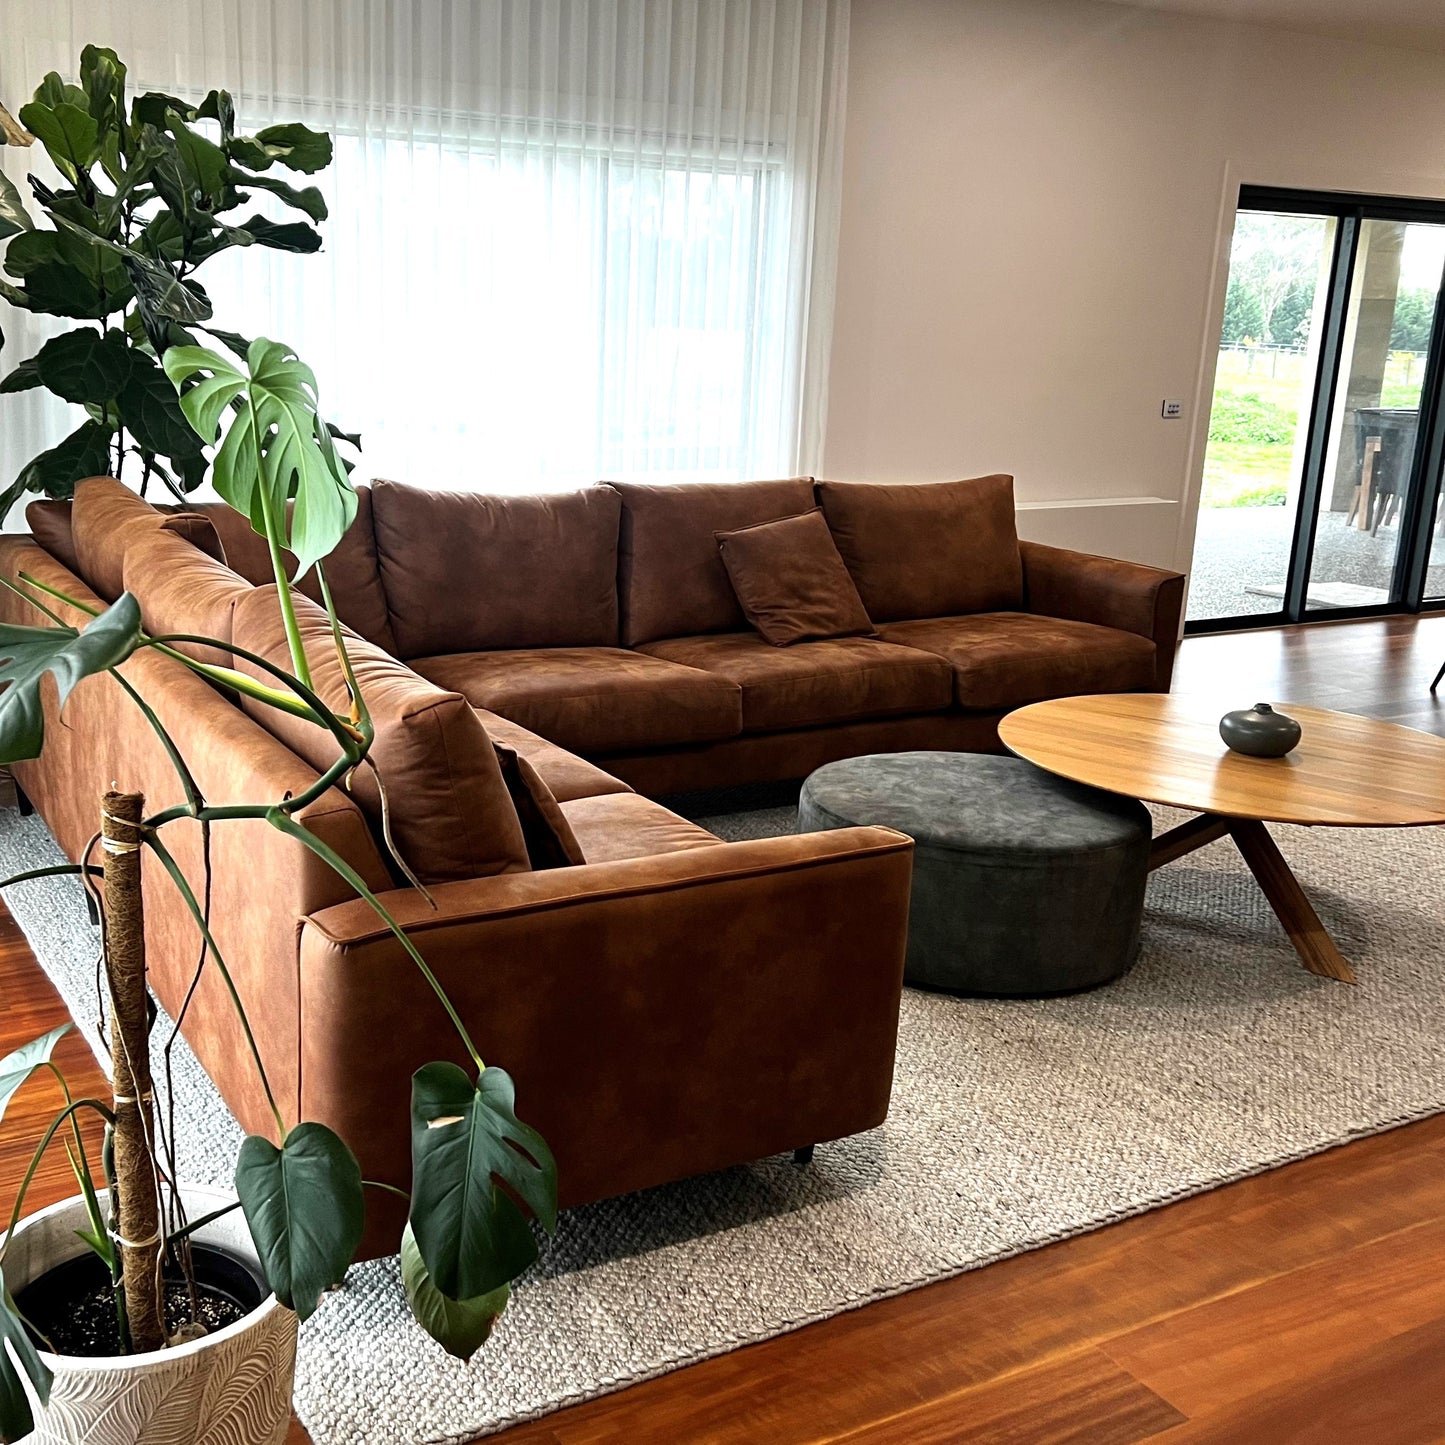 Alpine Modular Sofa by Molmic available from Make Your House A Home, Furniture Store located in Bendigo, Victoria. Australian Made in Melbourne.